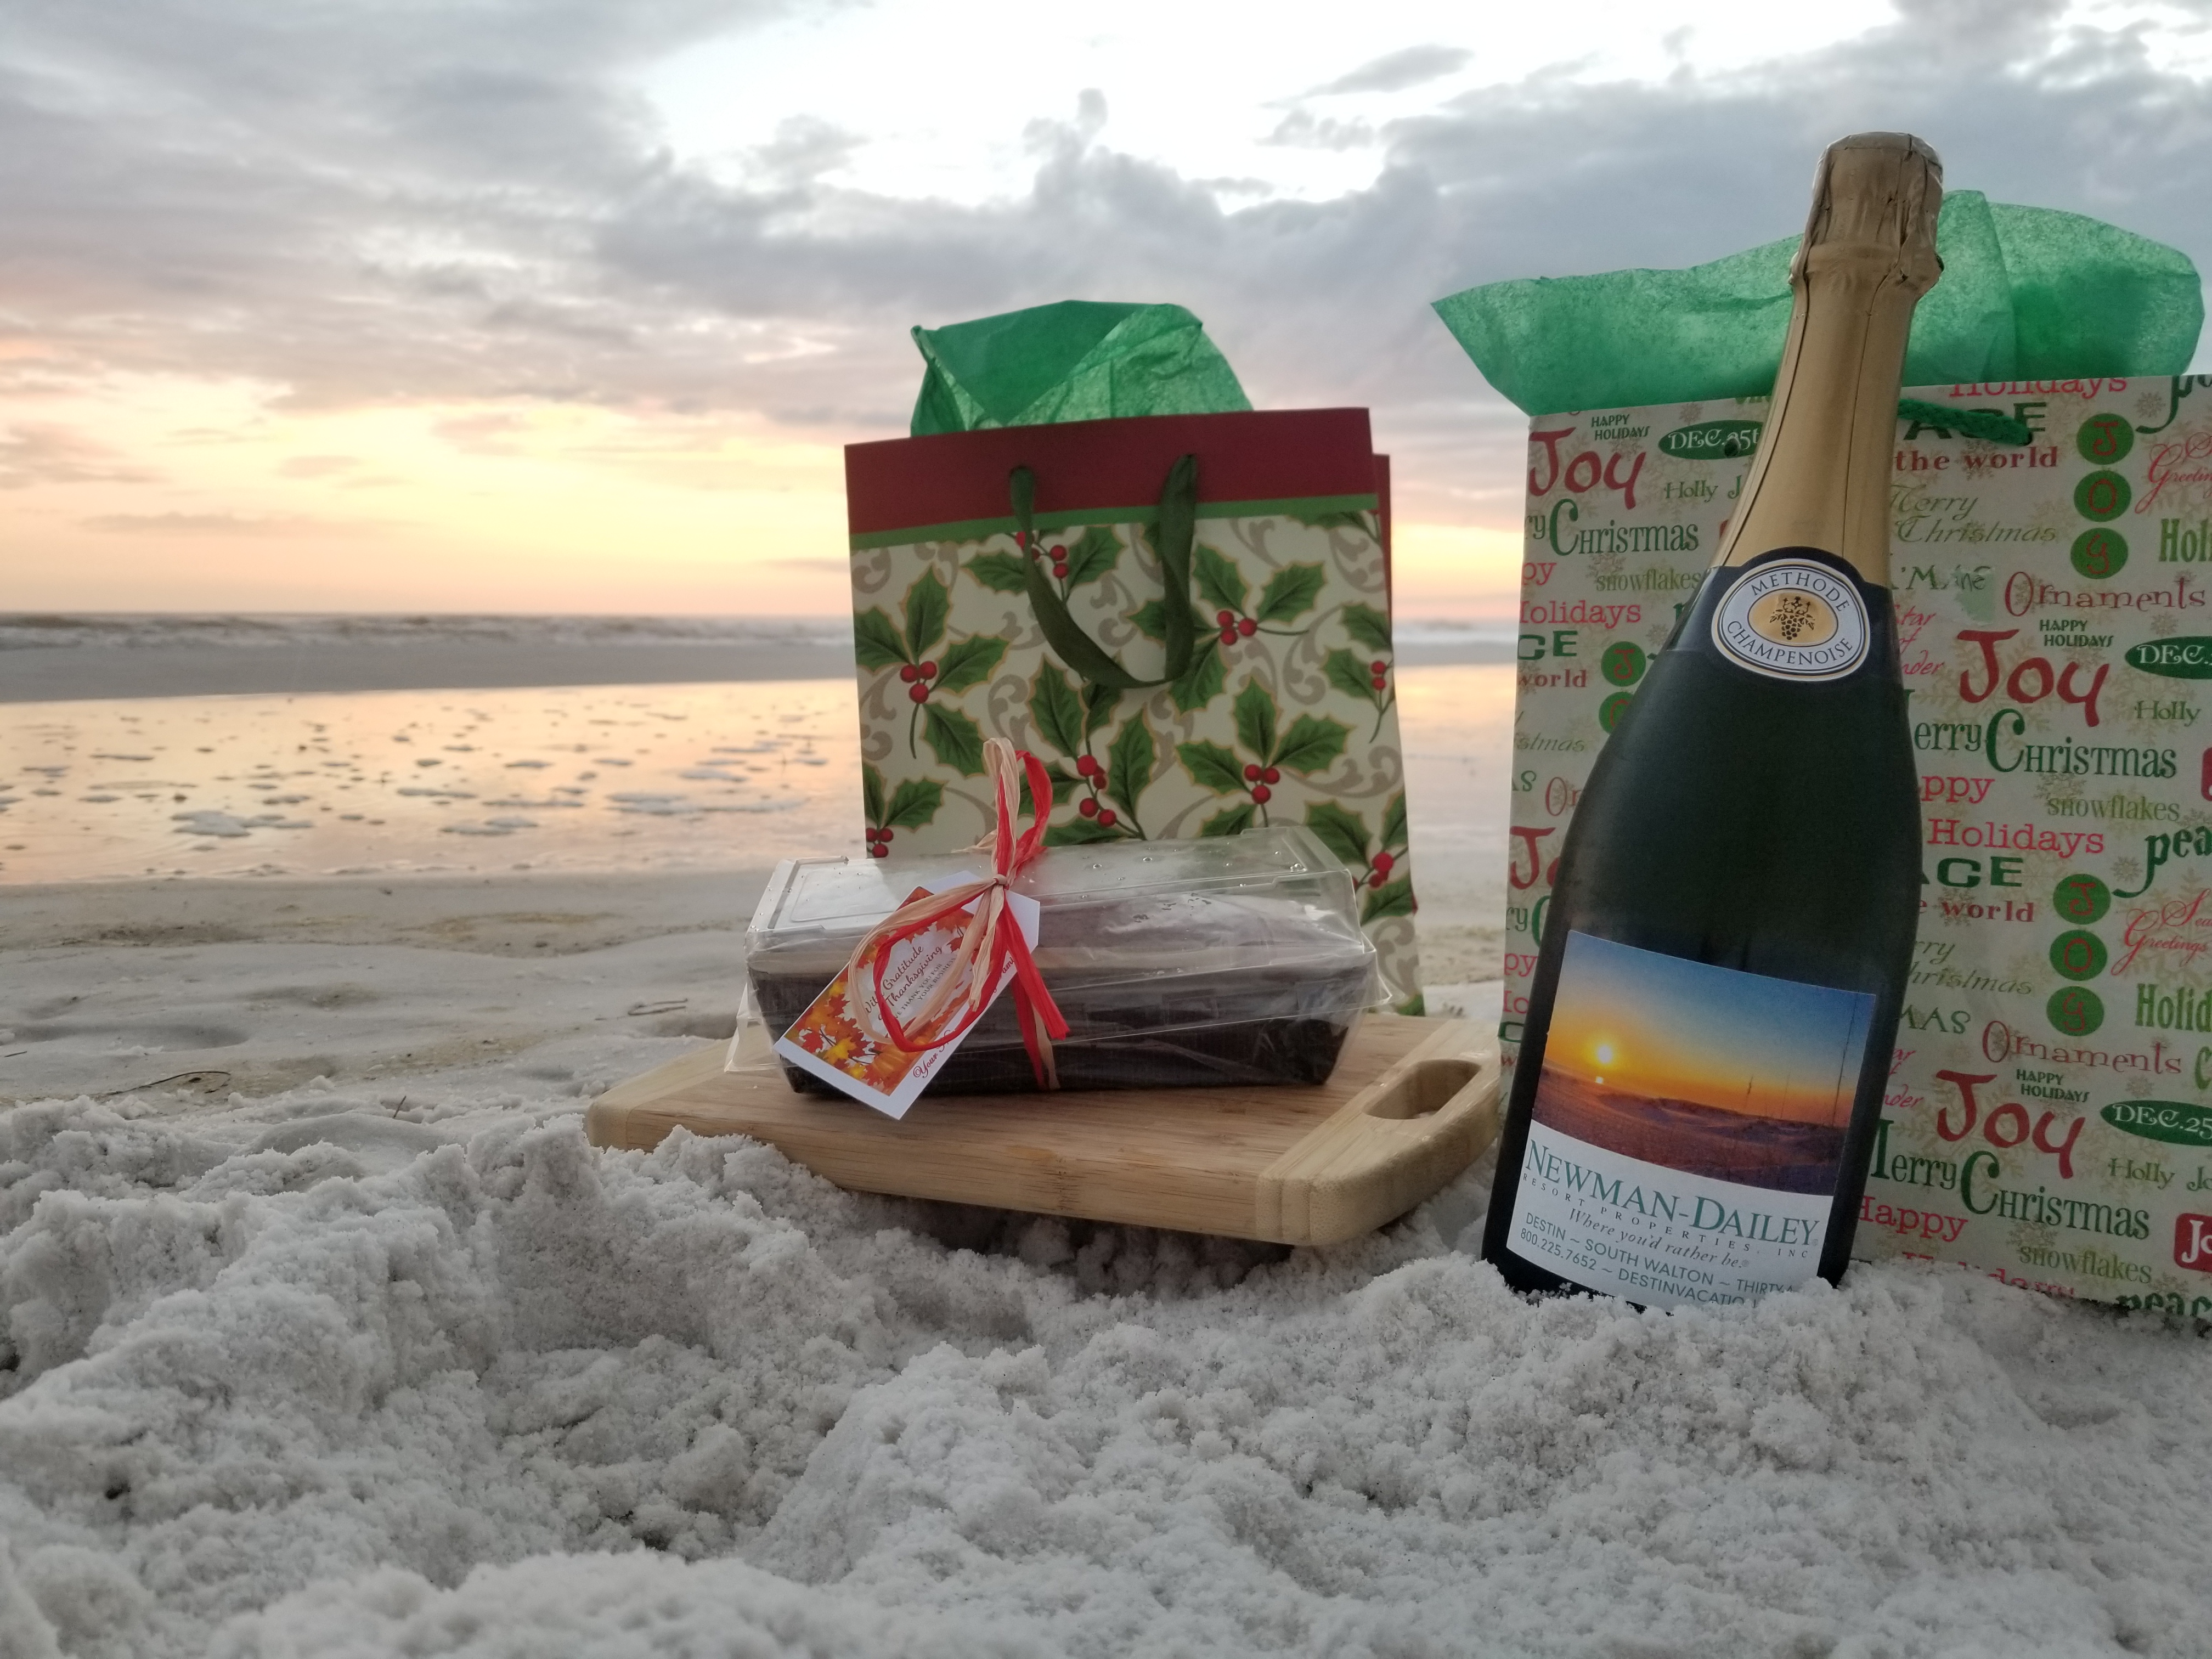 Newman-Dailey Resort Properties, a premier Destin vacation rental company, is welcoming families with a fresh baked loaf of bread for the holidays and sparkling wine for New Year's Eve celebrations.